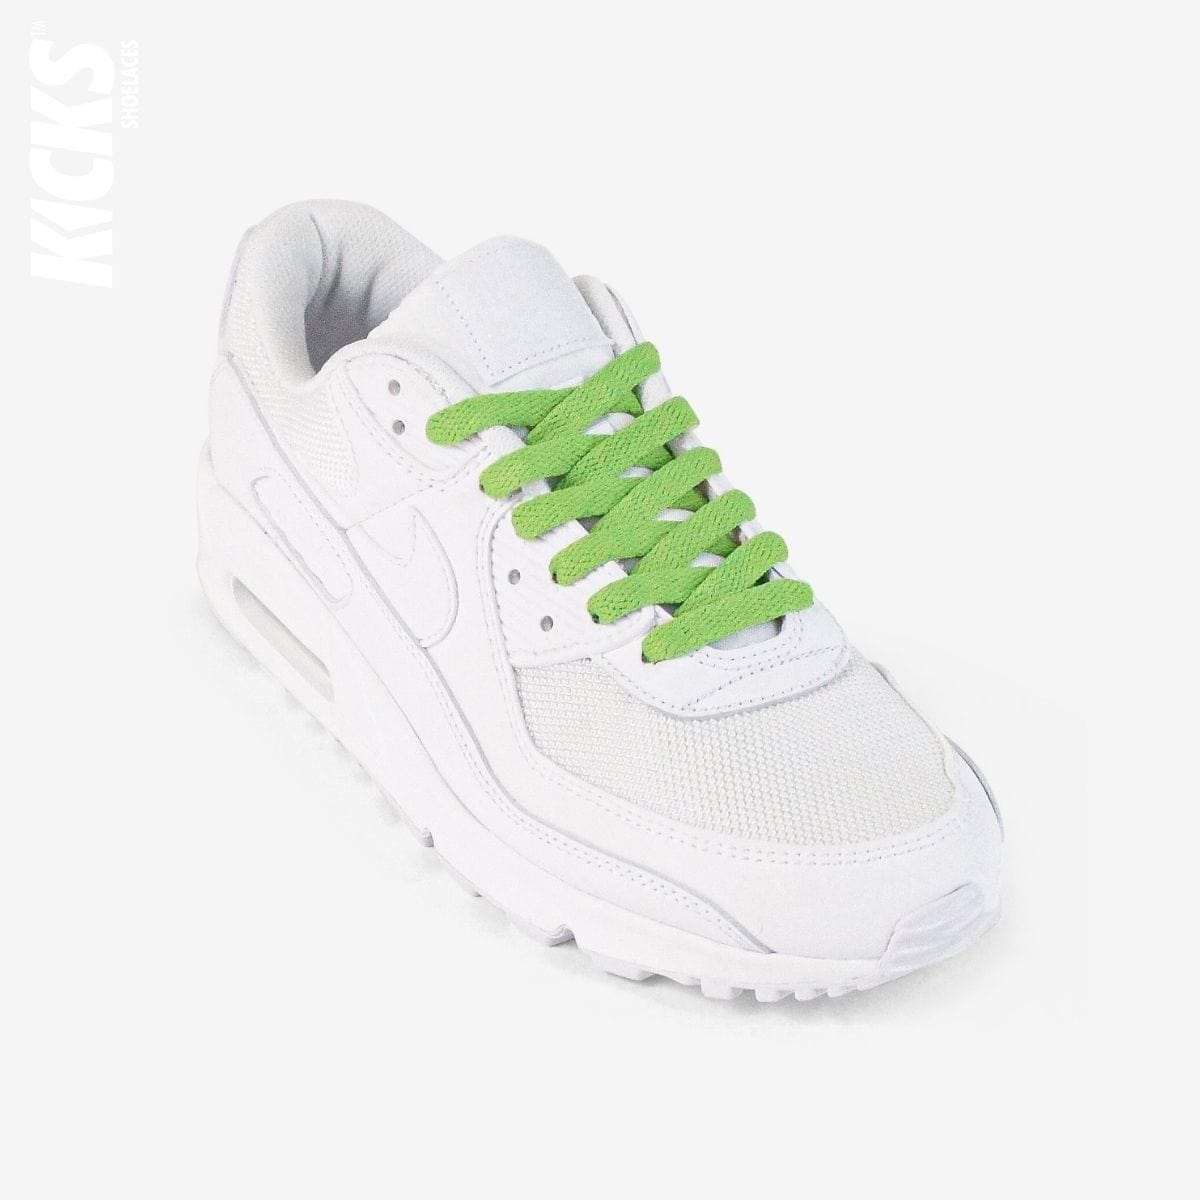 novelty-shoelaces-on-white-sneaker-using-kids-bright-green-flat-shoelaces